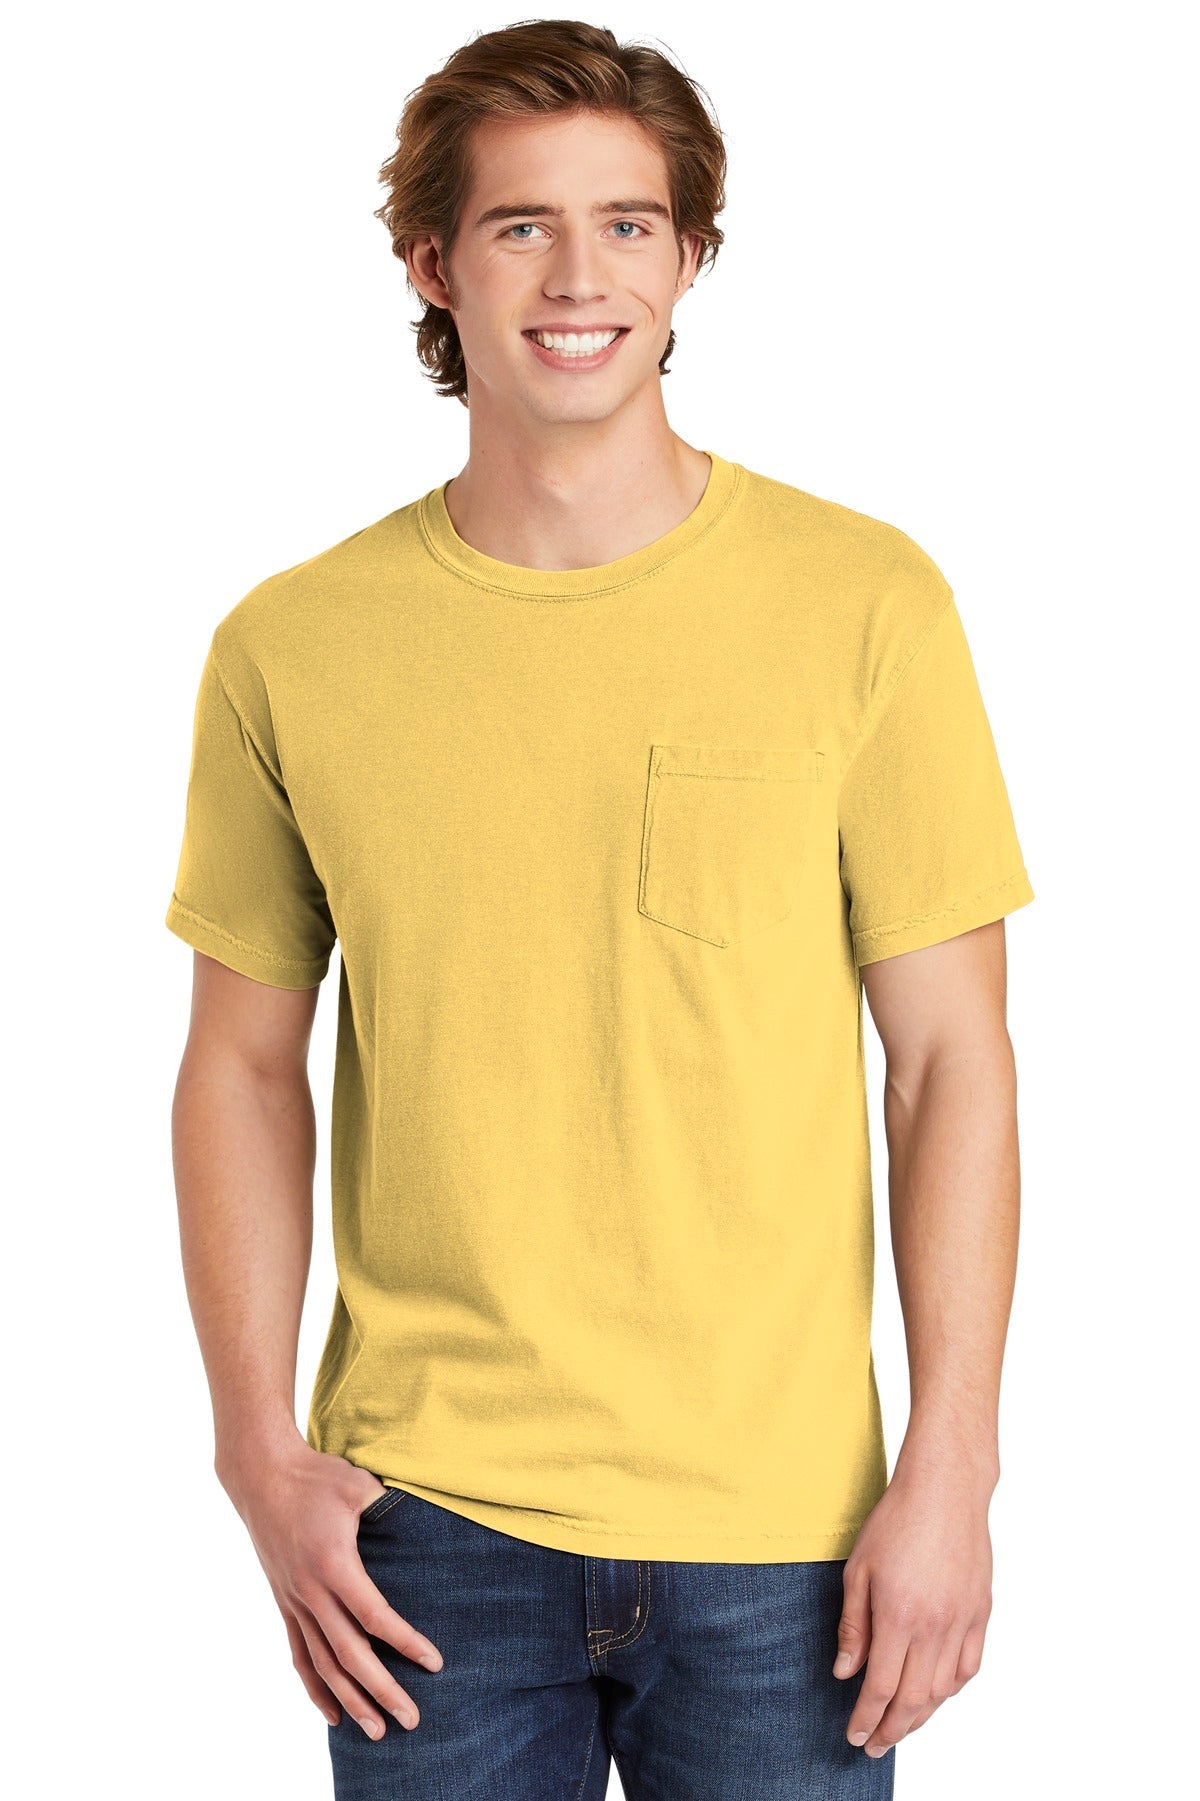 COMFORT COLORS ® Heavyweight Ring Spun Pocket Tee. 6030 [Butter] - DFW Impression